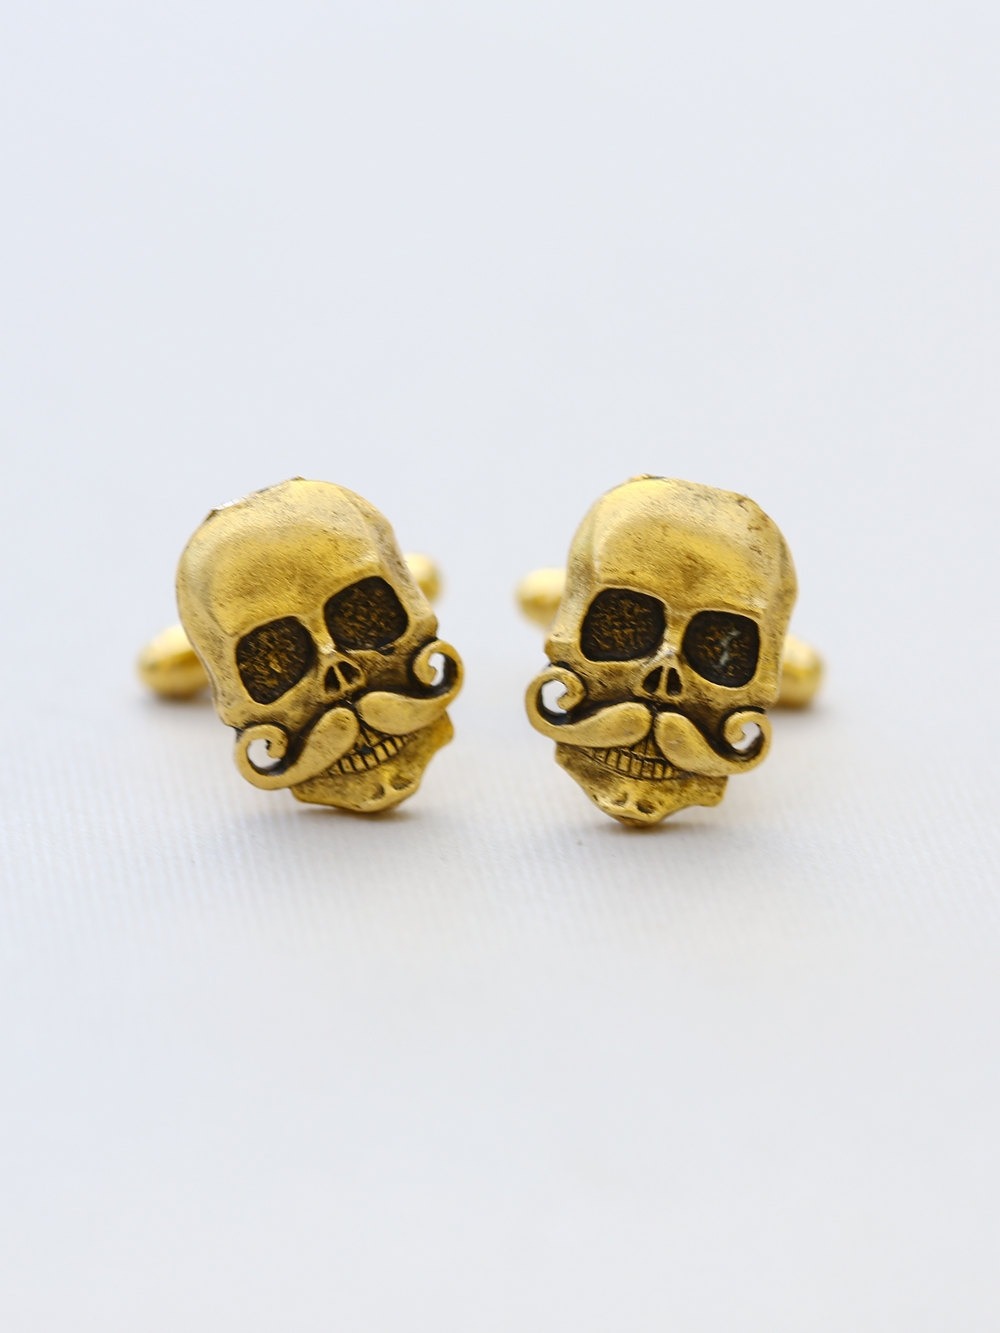 Skull With Mustache Cufflinks Brass Plated Metal Vintage Inspired Style Antiqued Finish Men's Cuff Links & Accessories steampunk buy now online